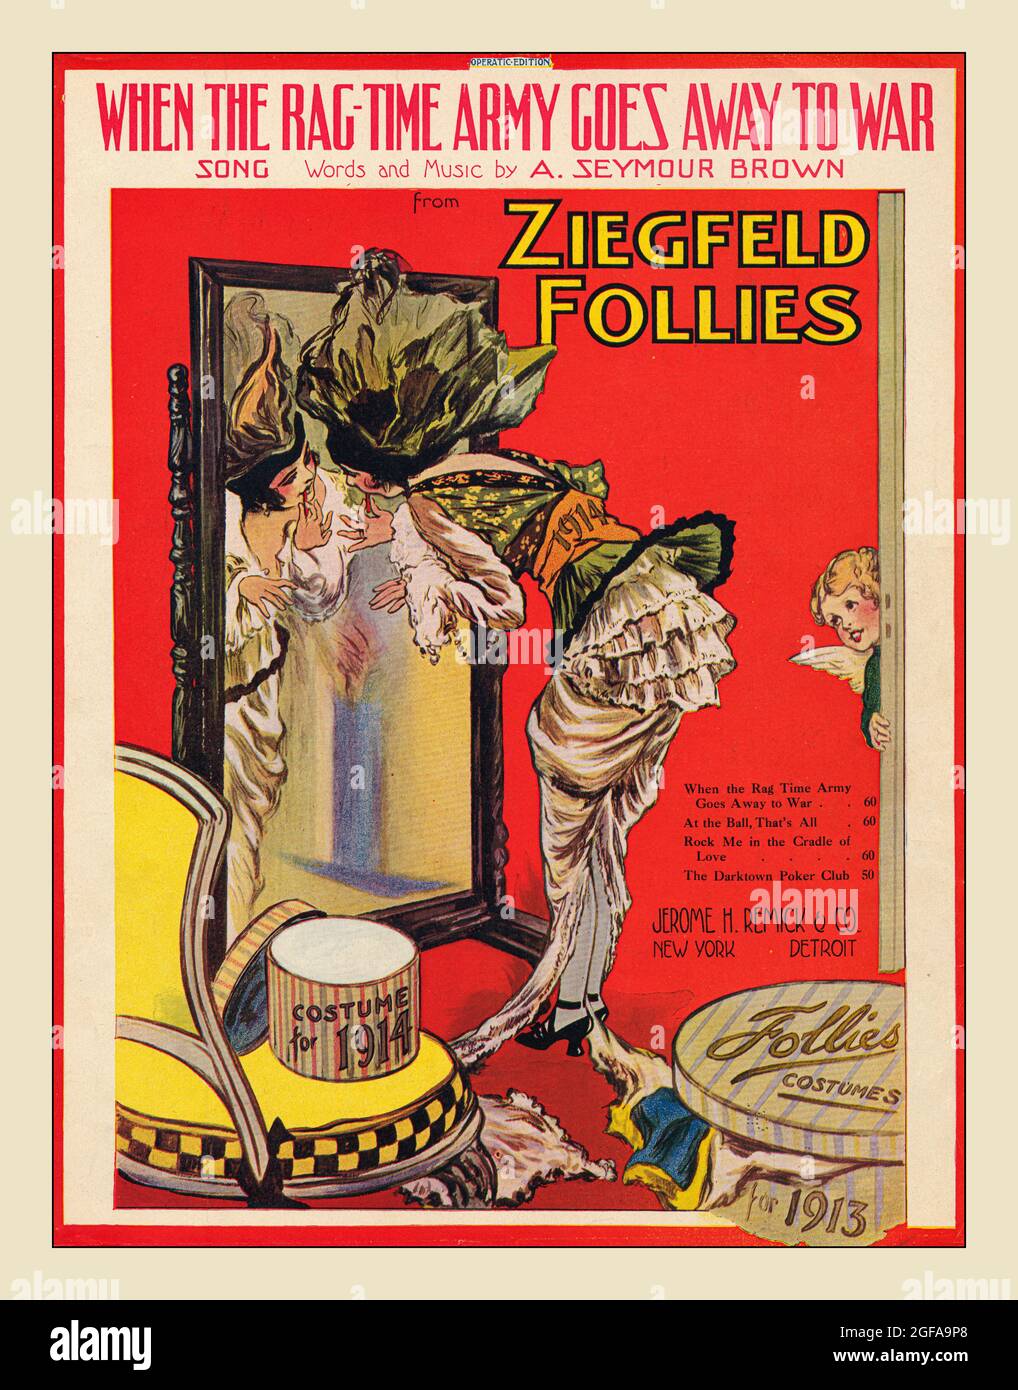 1. Weltkrieg Notenblatt-Cover ZIEGFELD-TORHEITEN ‘When the RAG-time Army goes Away to war’ 1913/1914 erster Weltkrieg Music Brown, A. Seymour -- 1885-1947 (Komponist) Brown, A. Seymour -- 1885-1947 (Texter) Created / Published Jerome H. Remick & Co., New York, NY, 1914. - Popular Songs of the Day - Songs and Music - Progressive Era to New Era (1900-1929) Noten Music Division Stockfoto